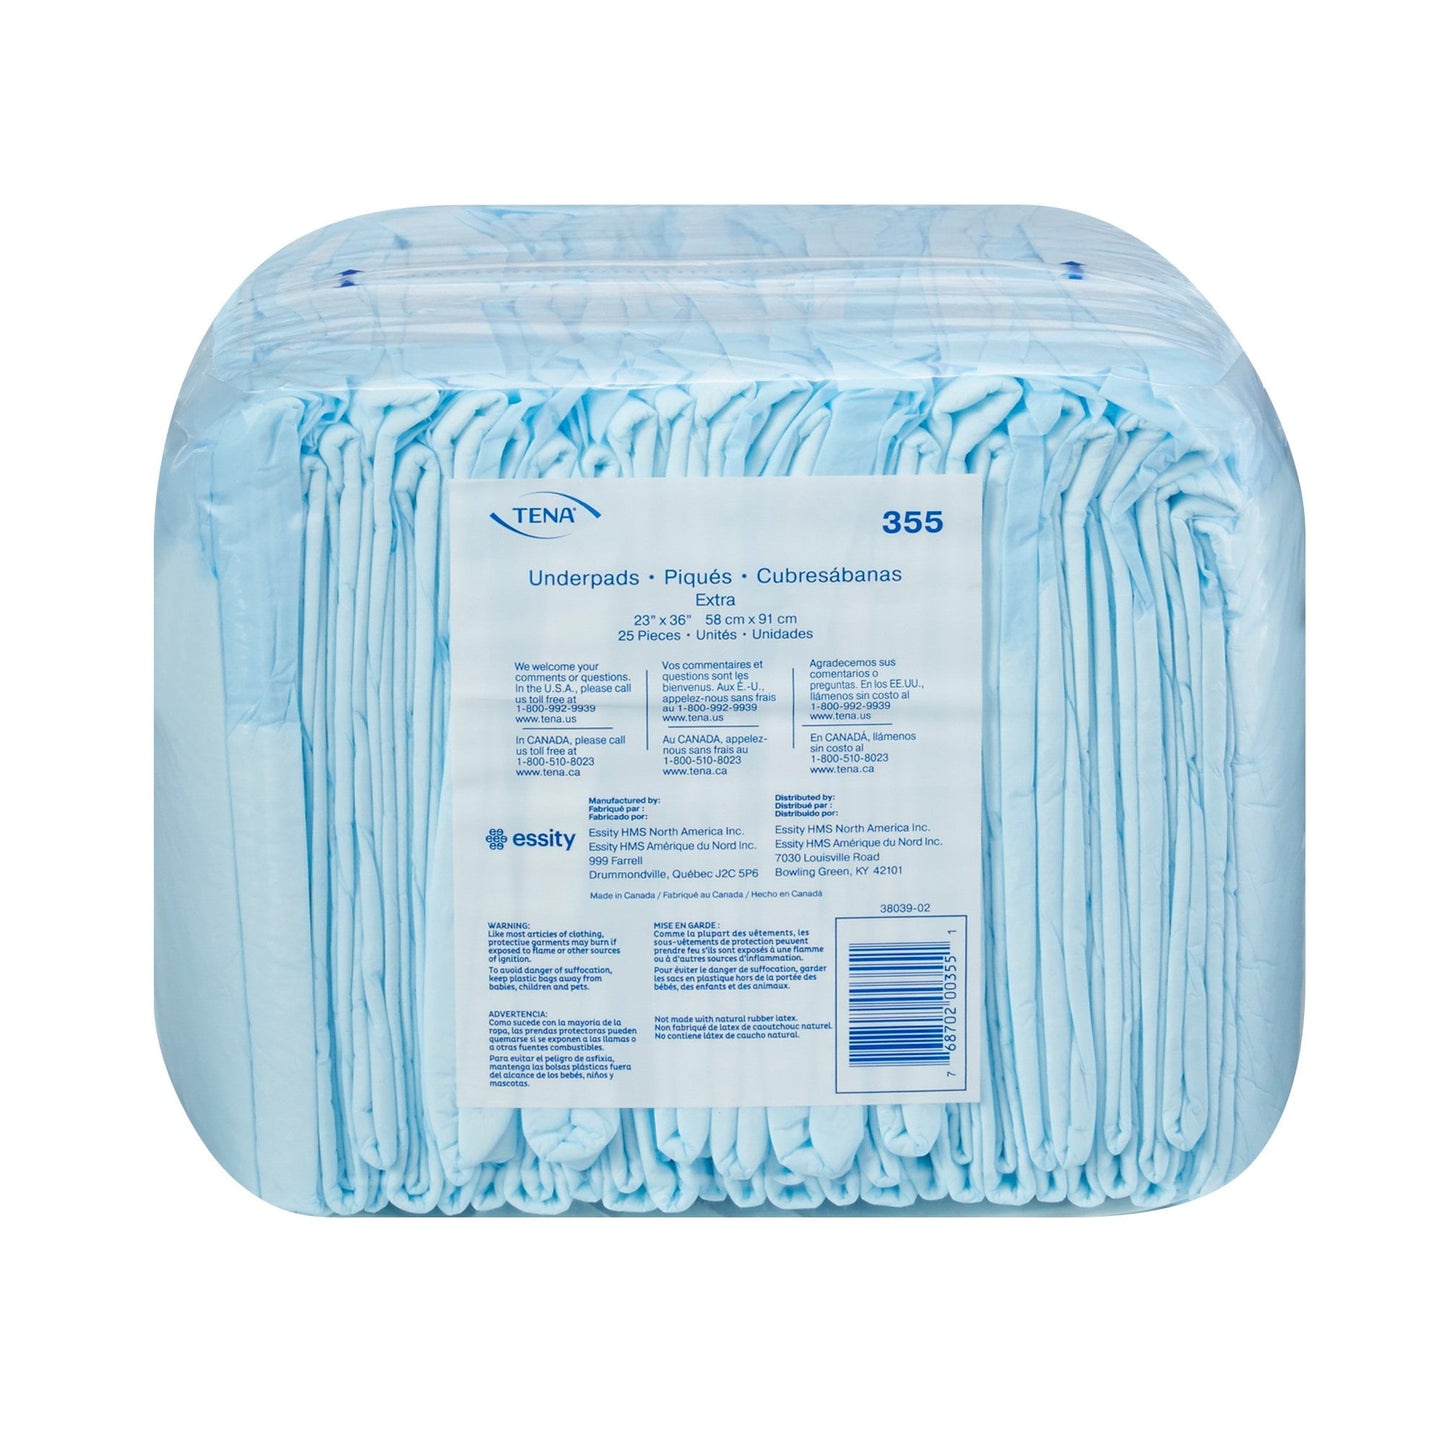 TENA Extra Underpad, Incontinence, Disposable, Light Absorbency, 23 in x 36 in, 150 Ct- KatyMedSolutions